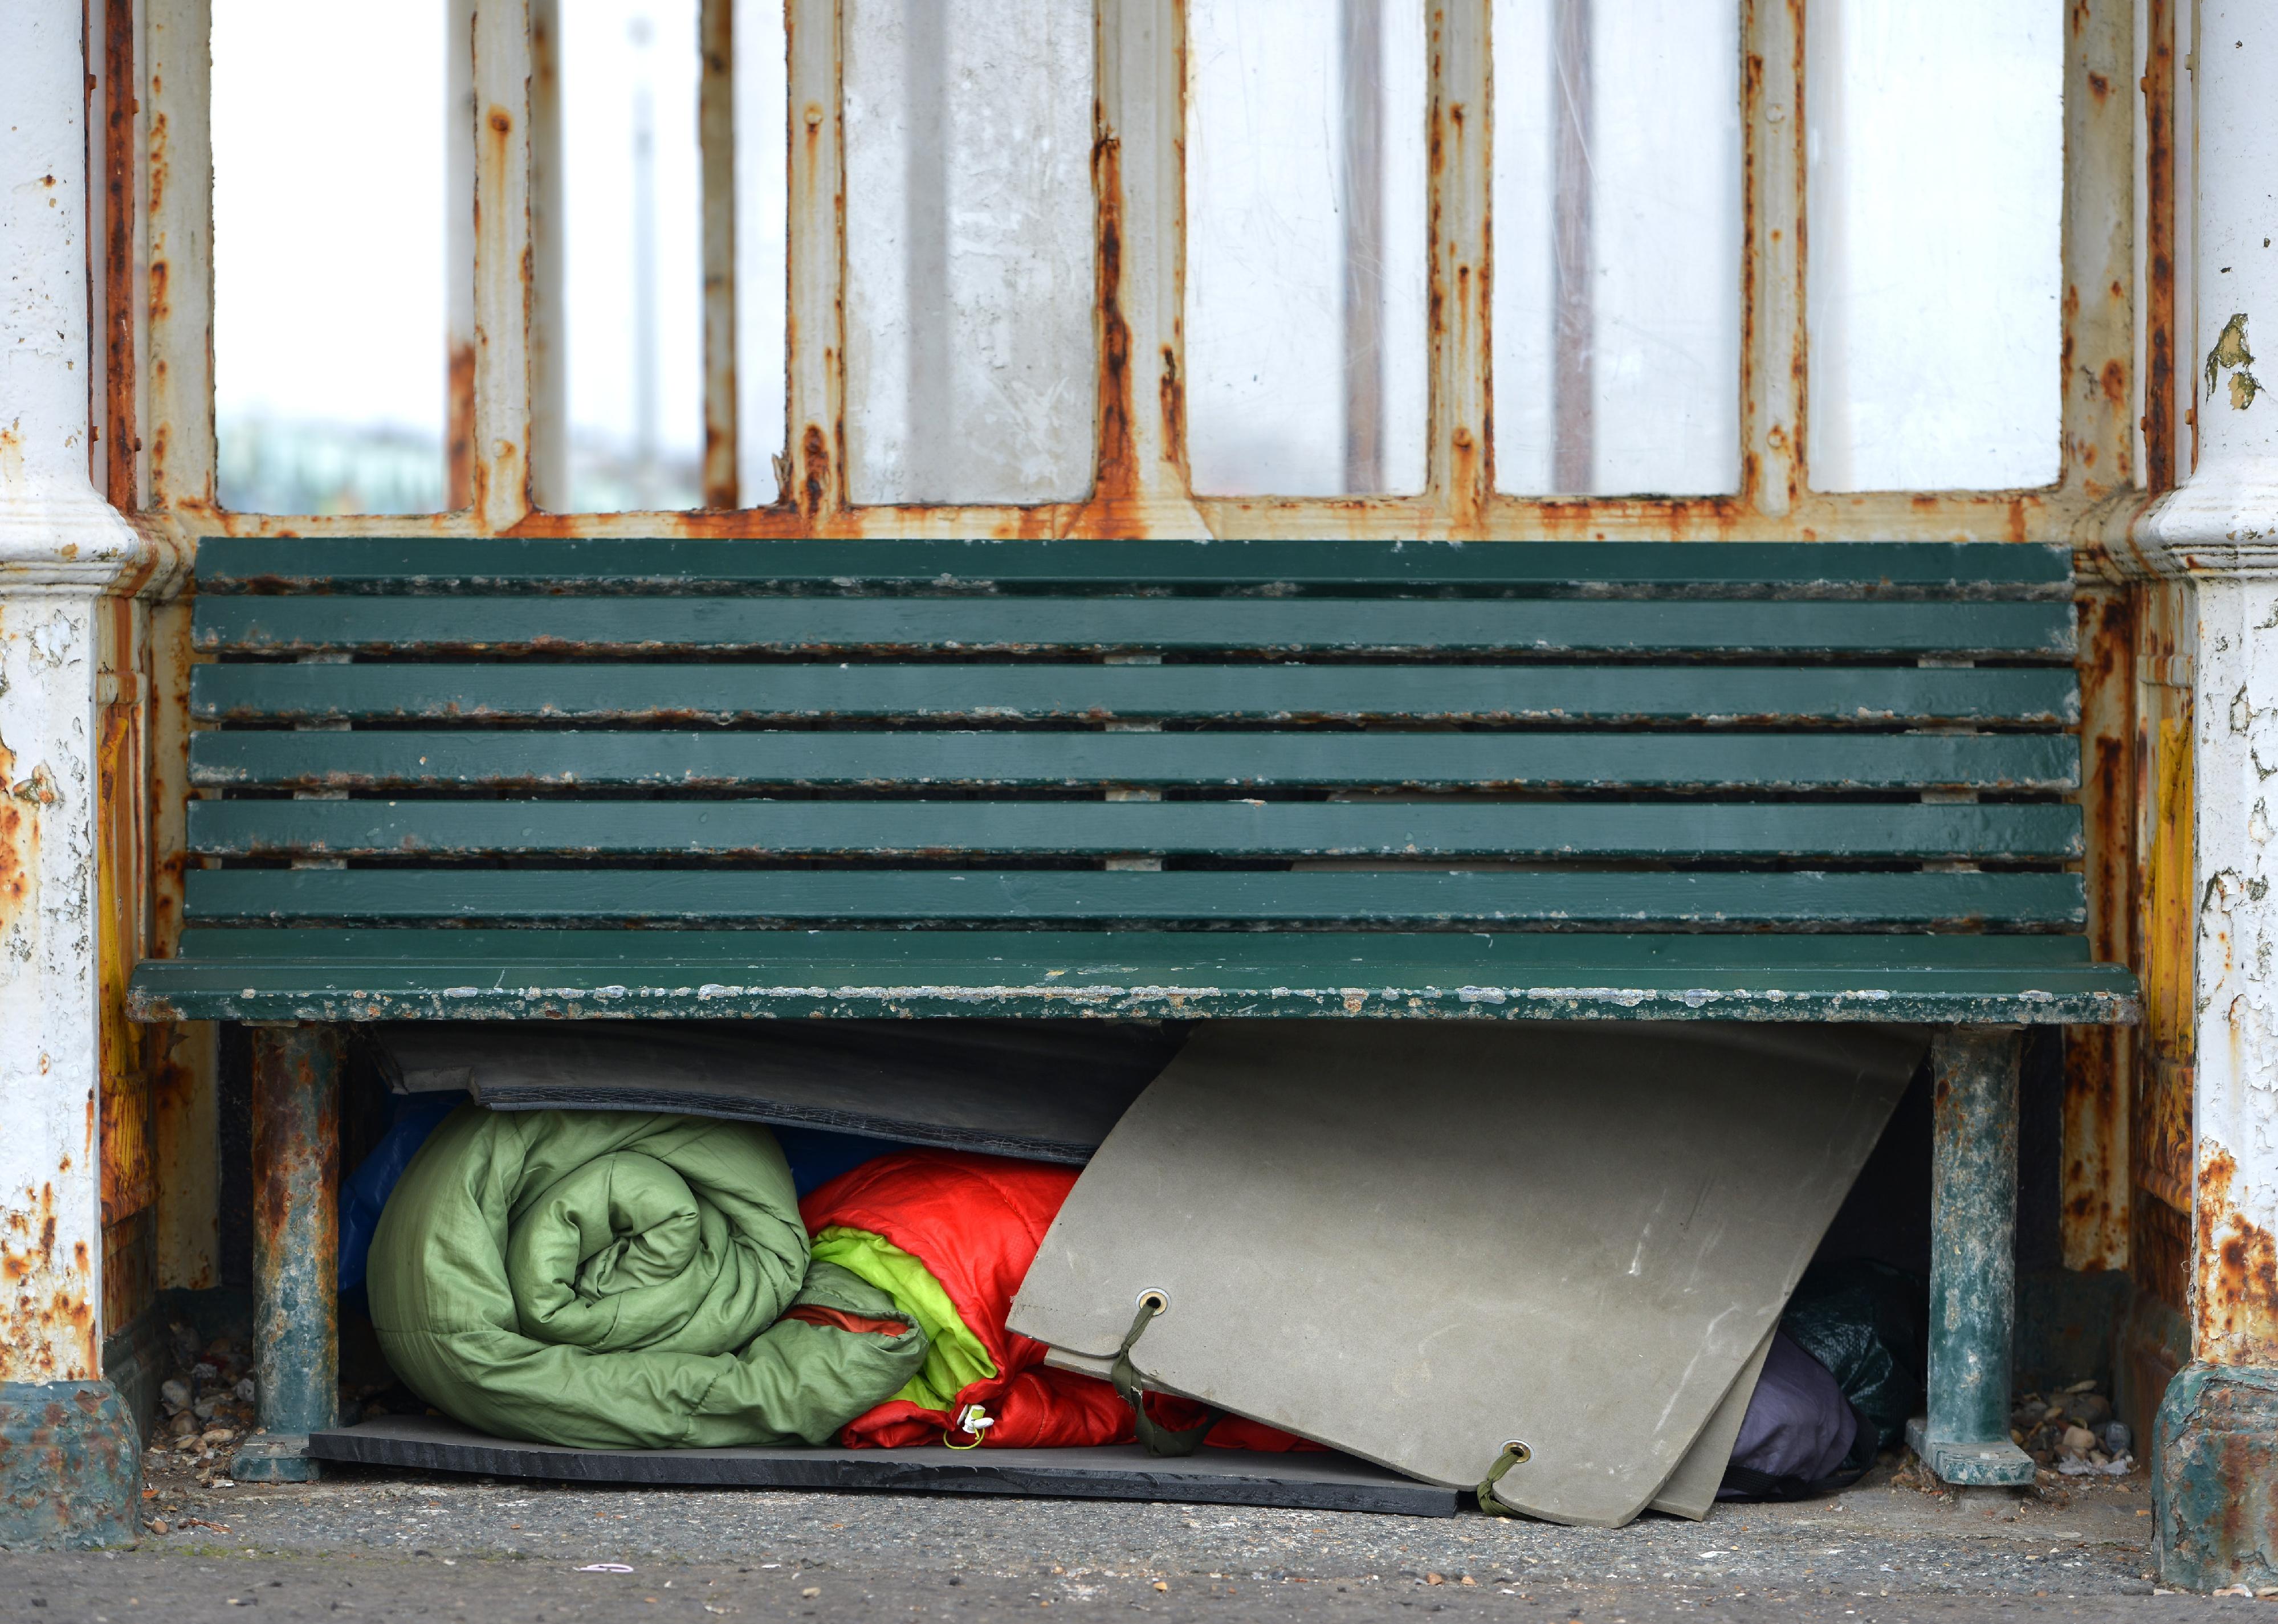 Homeless person's sleeping bags and bedding under a bench.